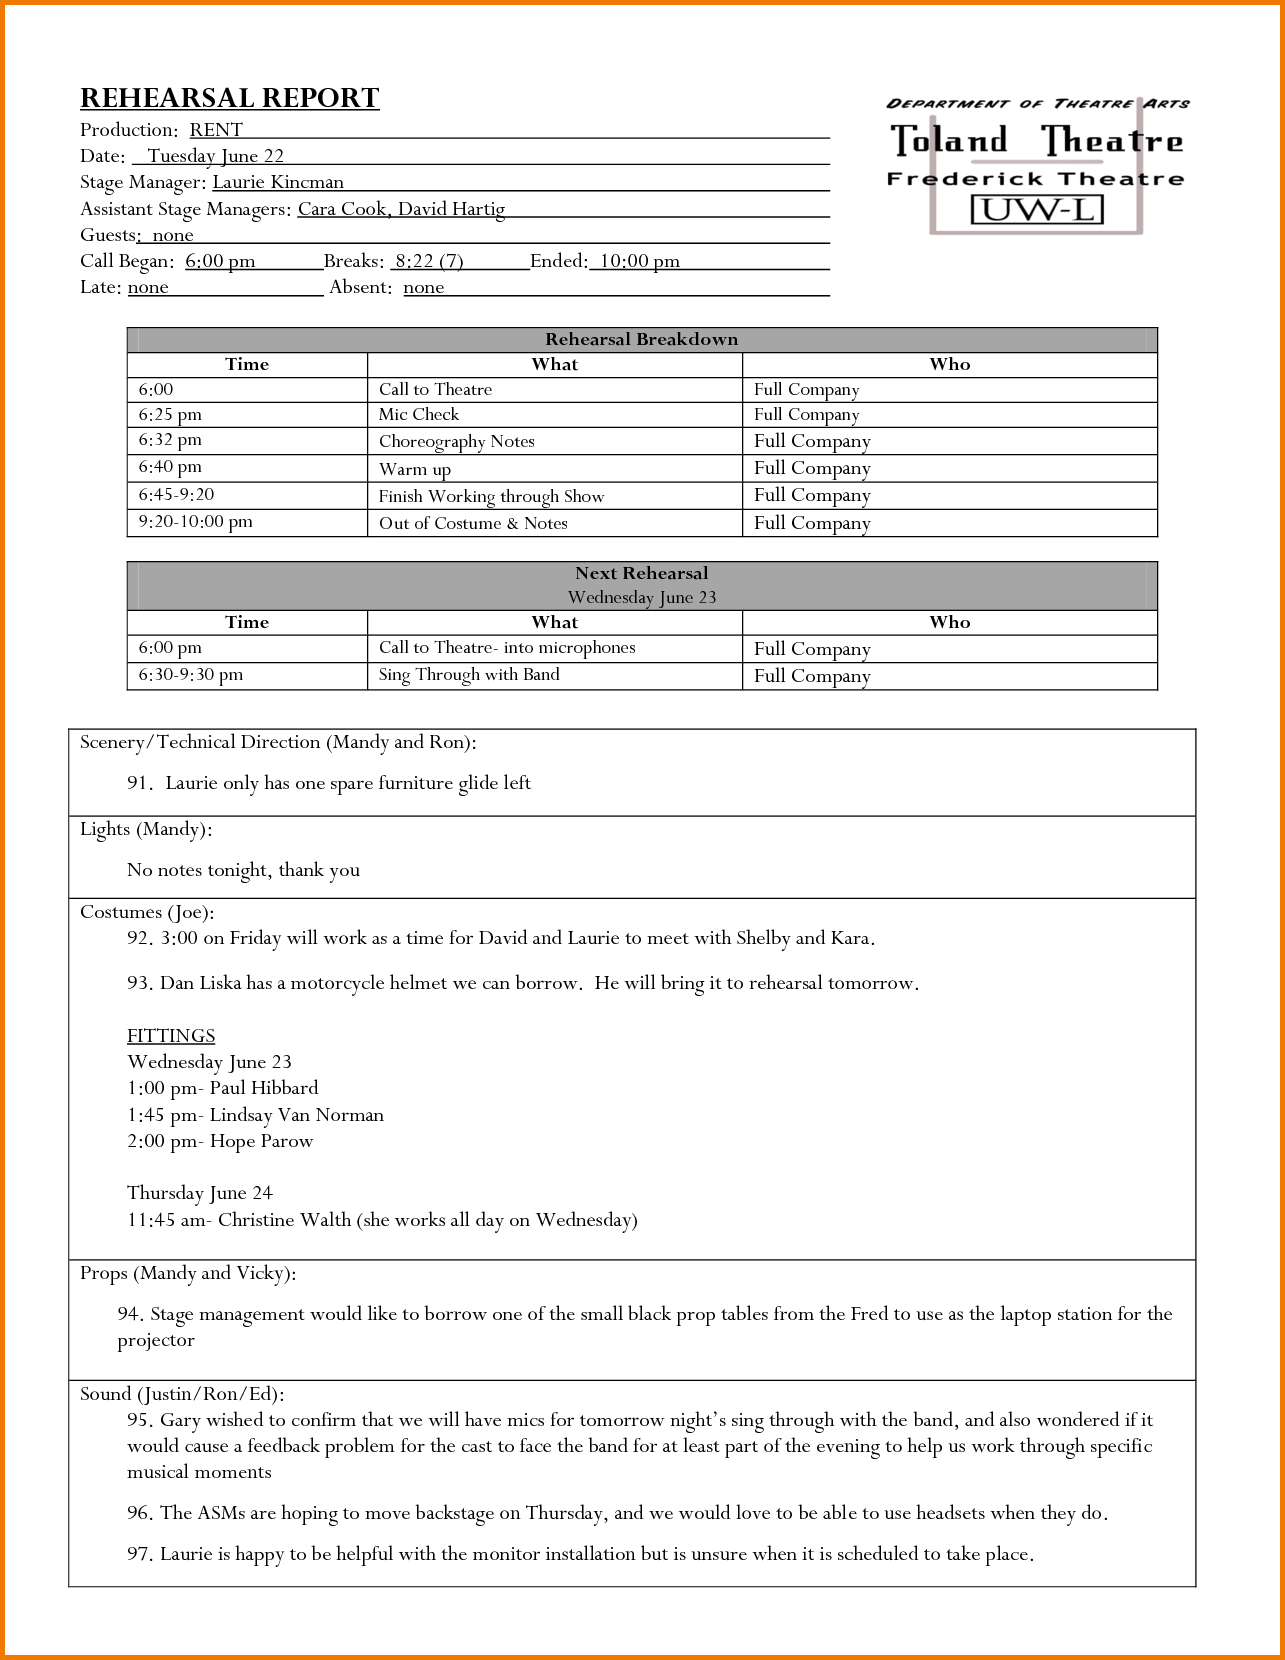 Rehearsal Report Template Editable Digital Expense | Theatre Pertaining To Rehearsal Report Template